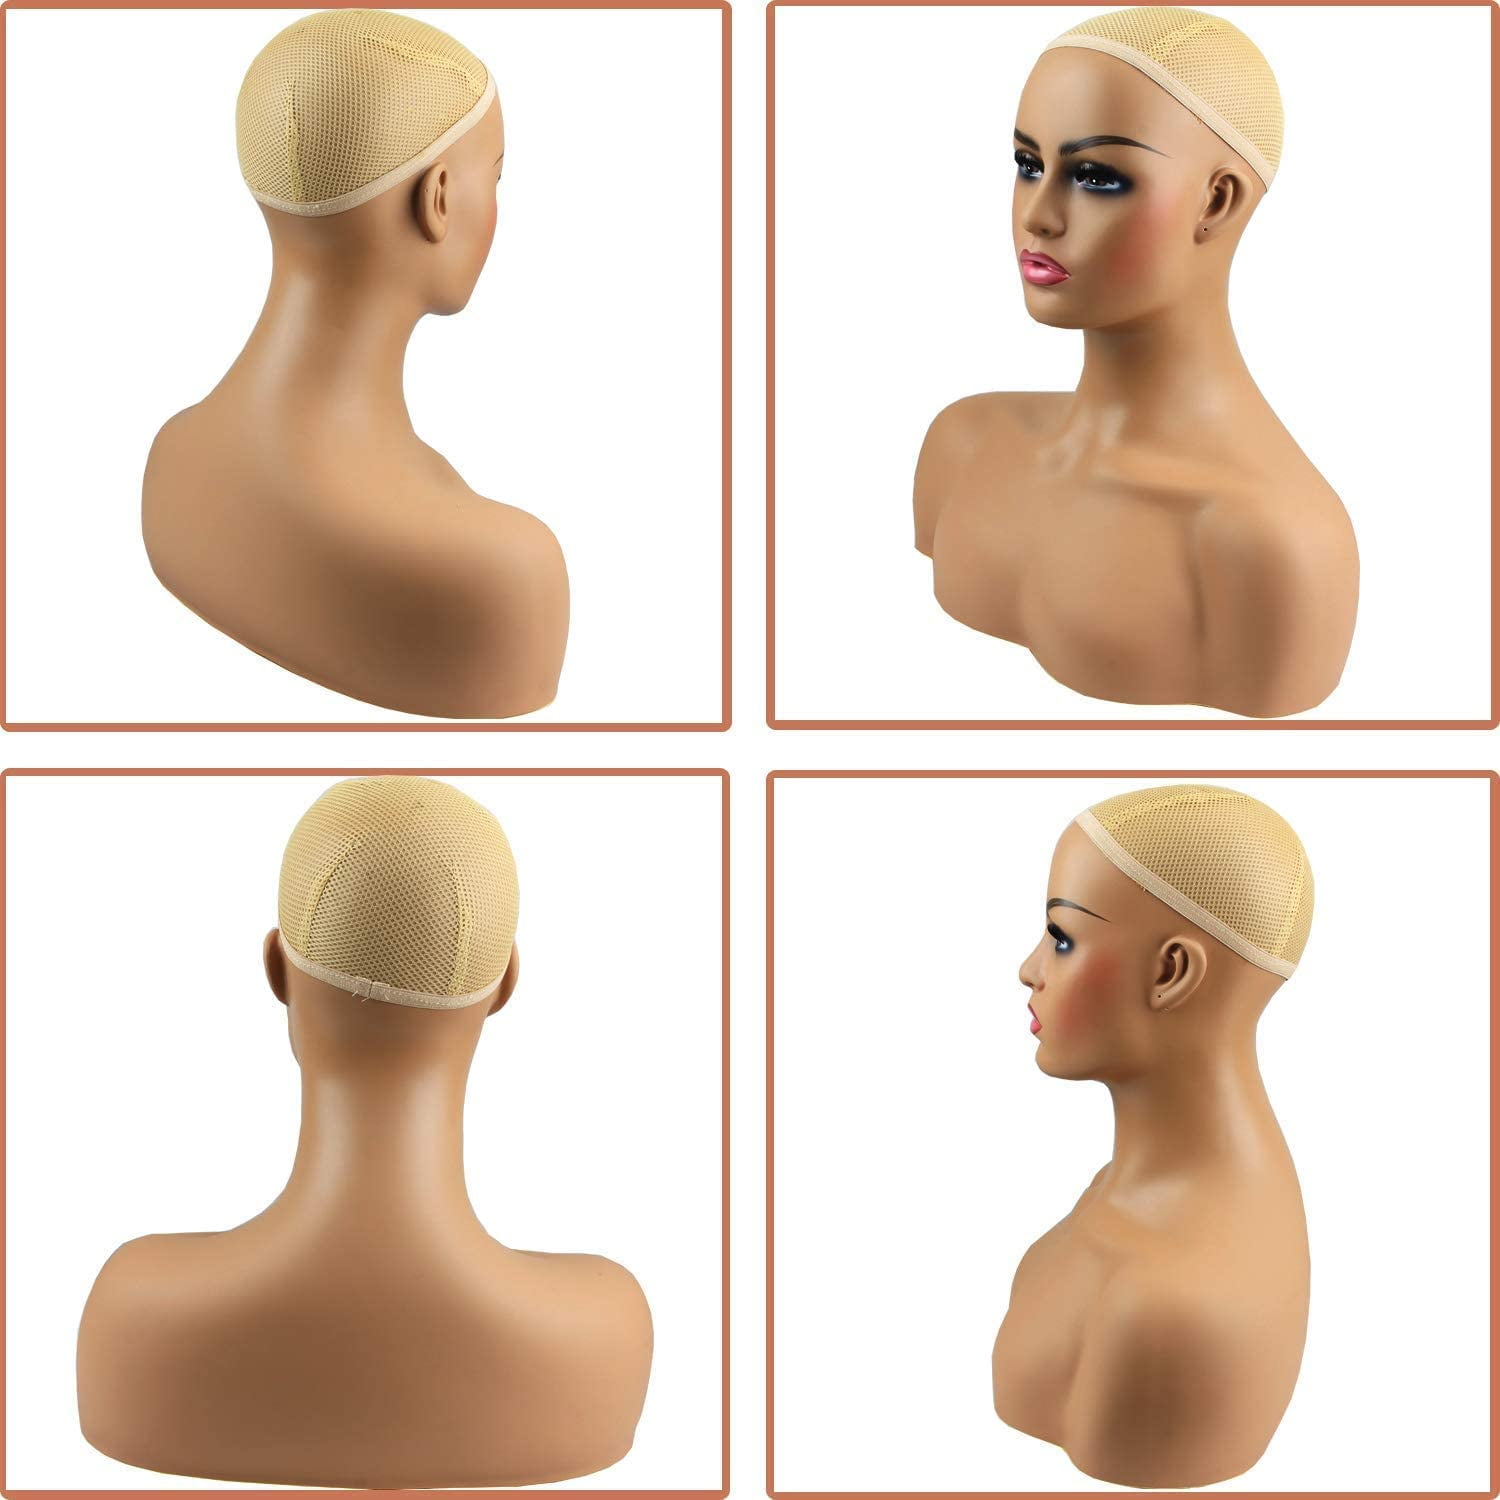 A1 Pacific Mannequin PVC Manikin Head Realistic Mannequin Head Bust Wig Head Stand for Wigs Display Making Styling Pmh-cm (16.5, Caucasian)